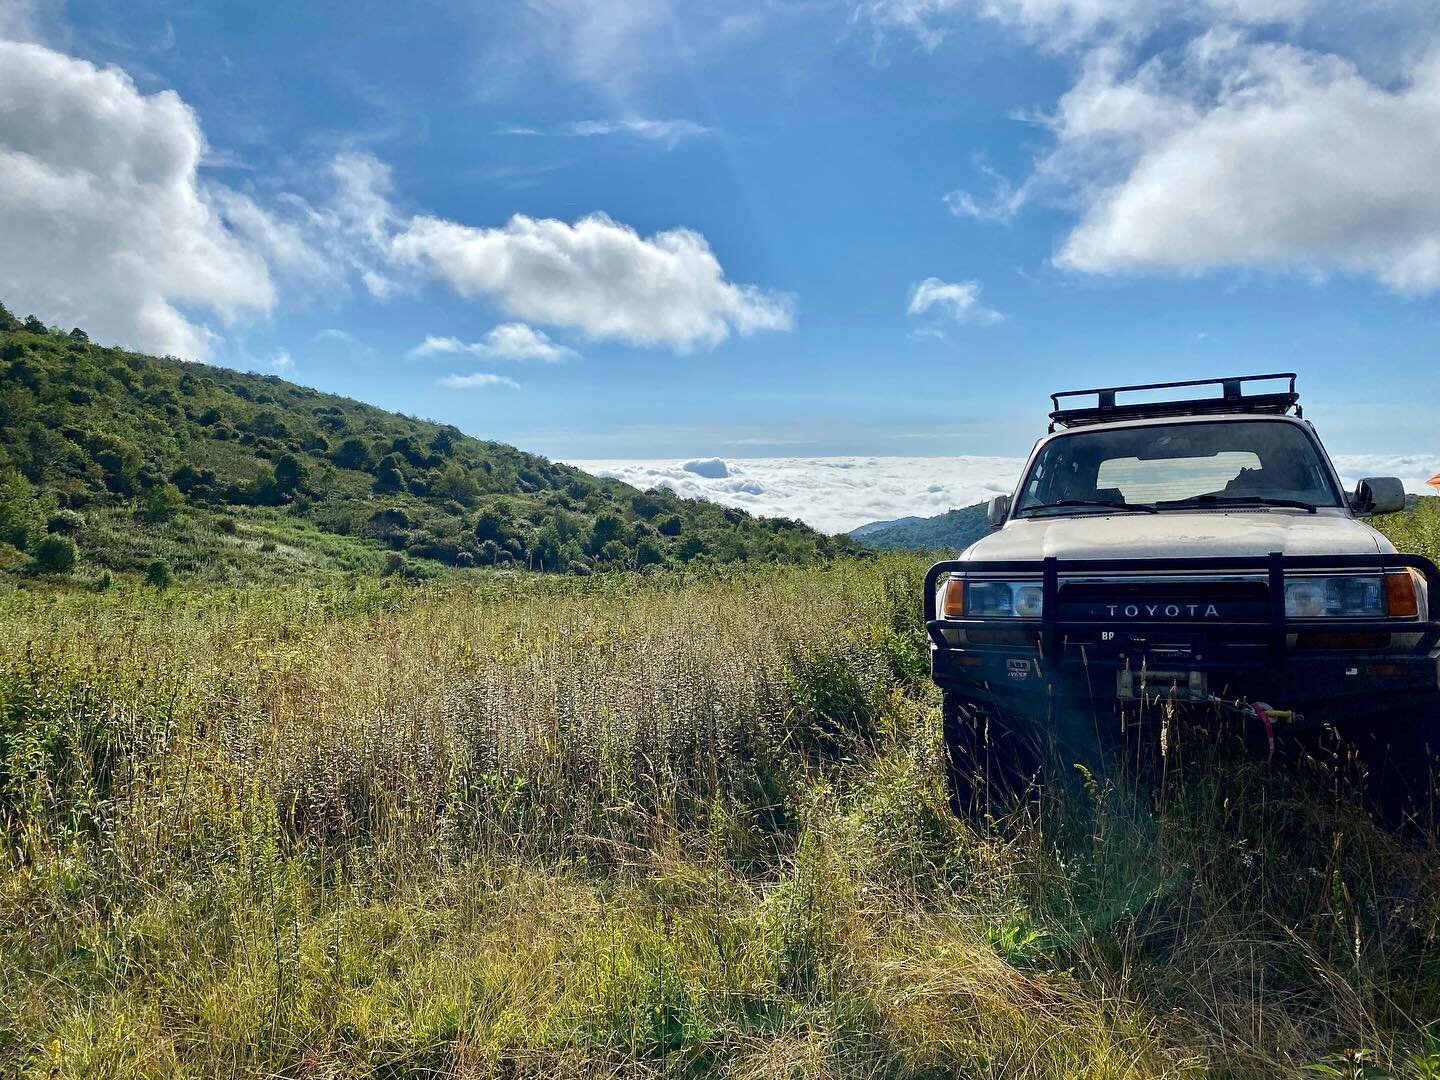 A beautiful time to drive a Land Cruiser. ⛰ #landcruiser #80series #toyota #mountainlife #overland #toyotagram #offroad #letsgoplaces #ohwhatafeeling #ih8mud